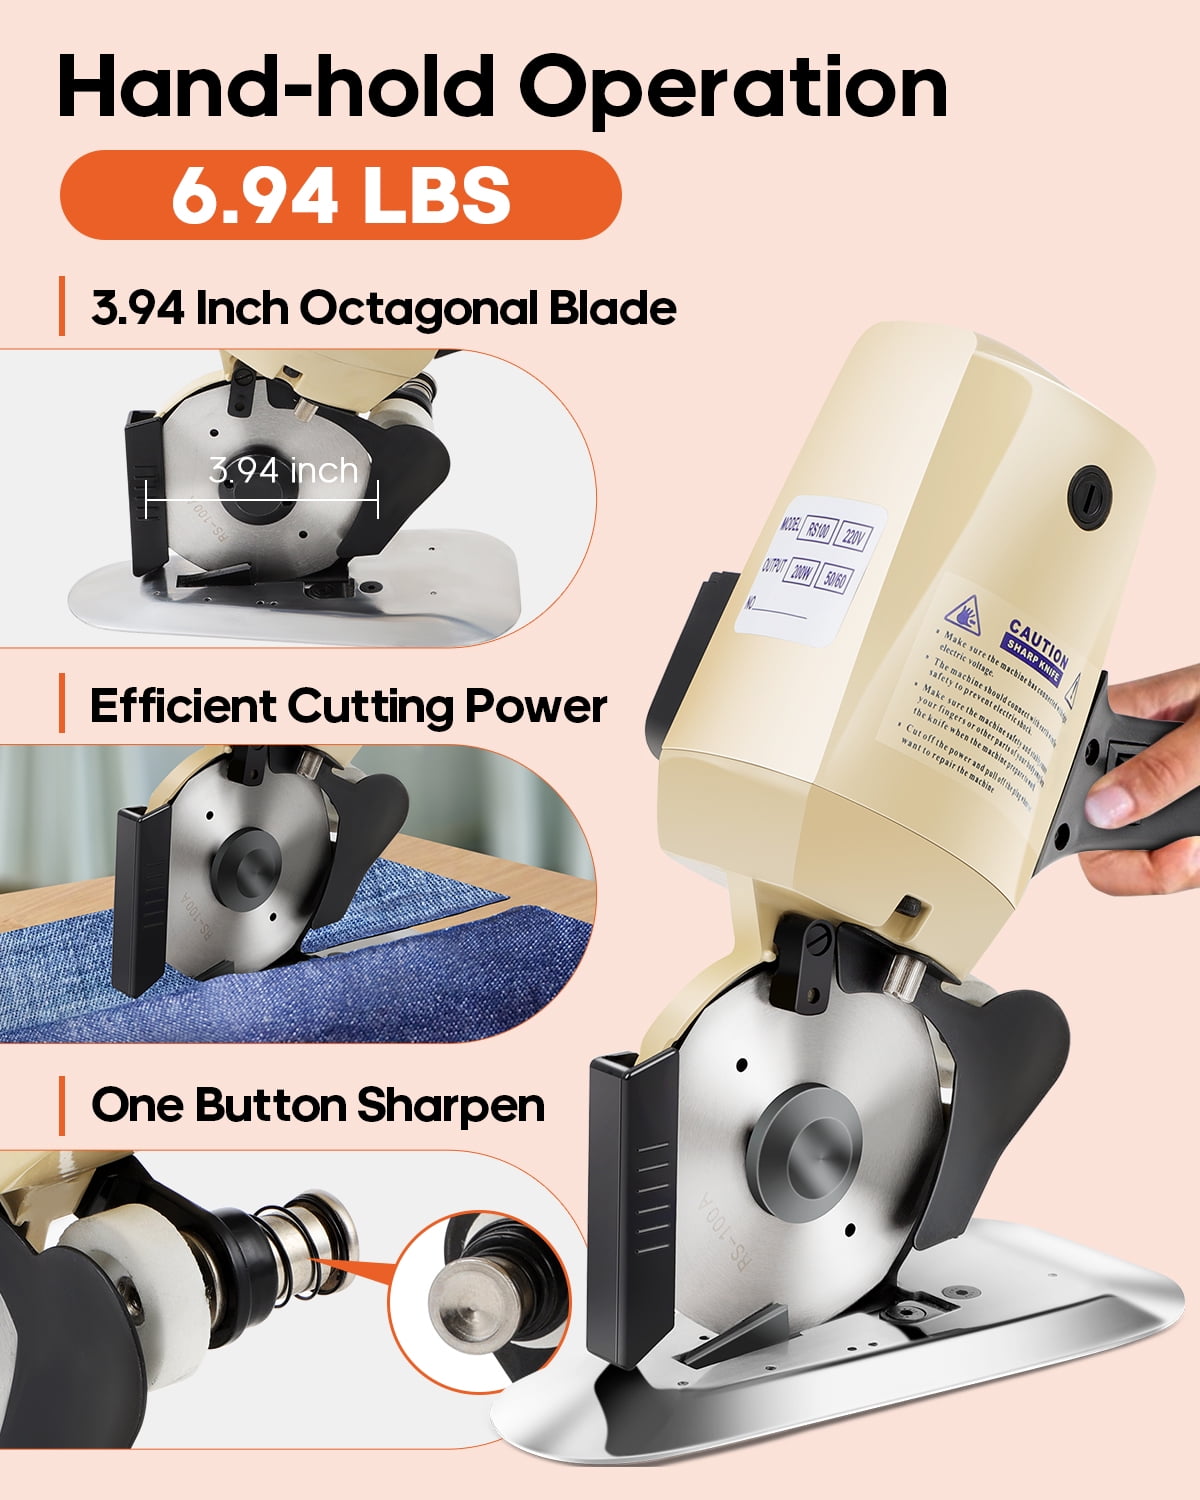 45mm Round Cutters Sewing Rotary Cloth Guiding Cutting Machine